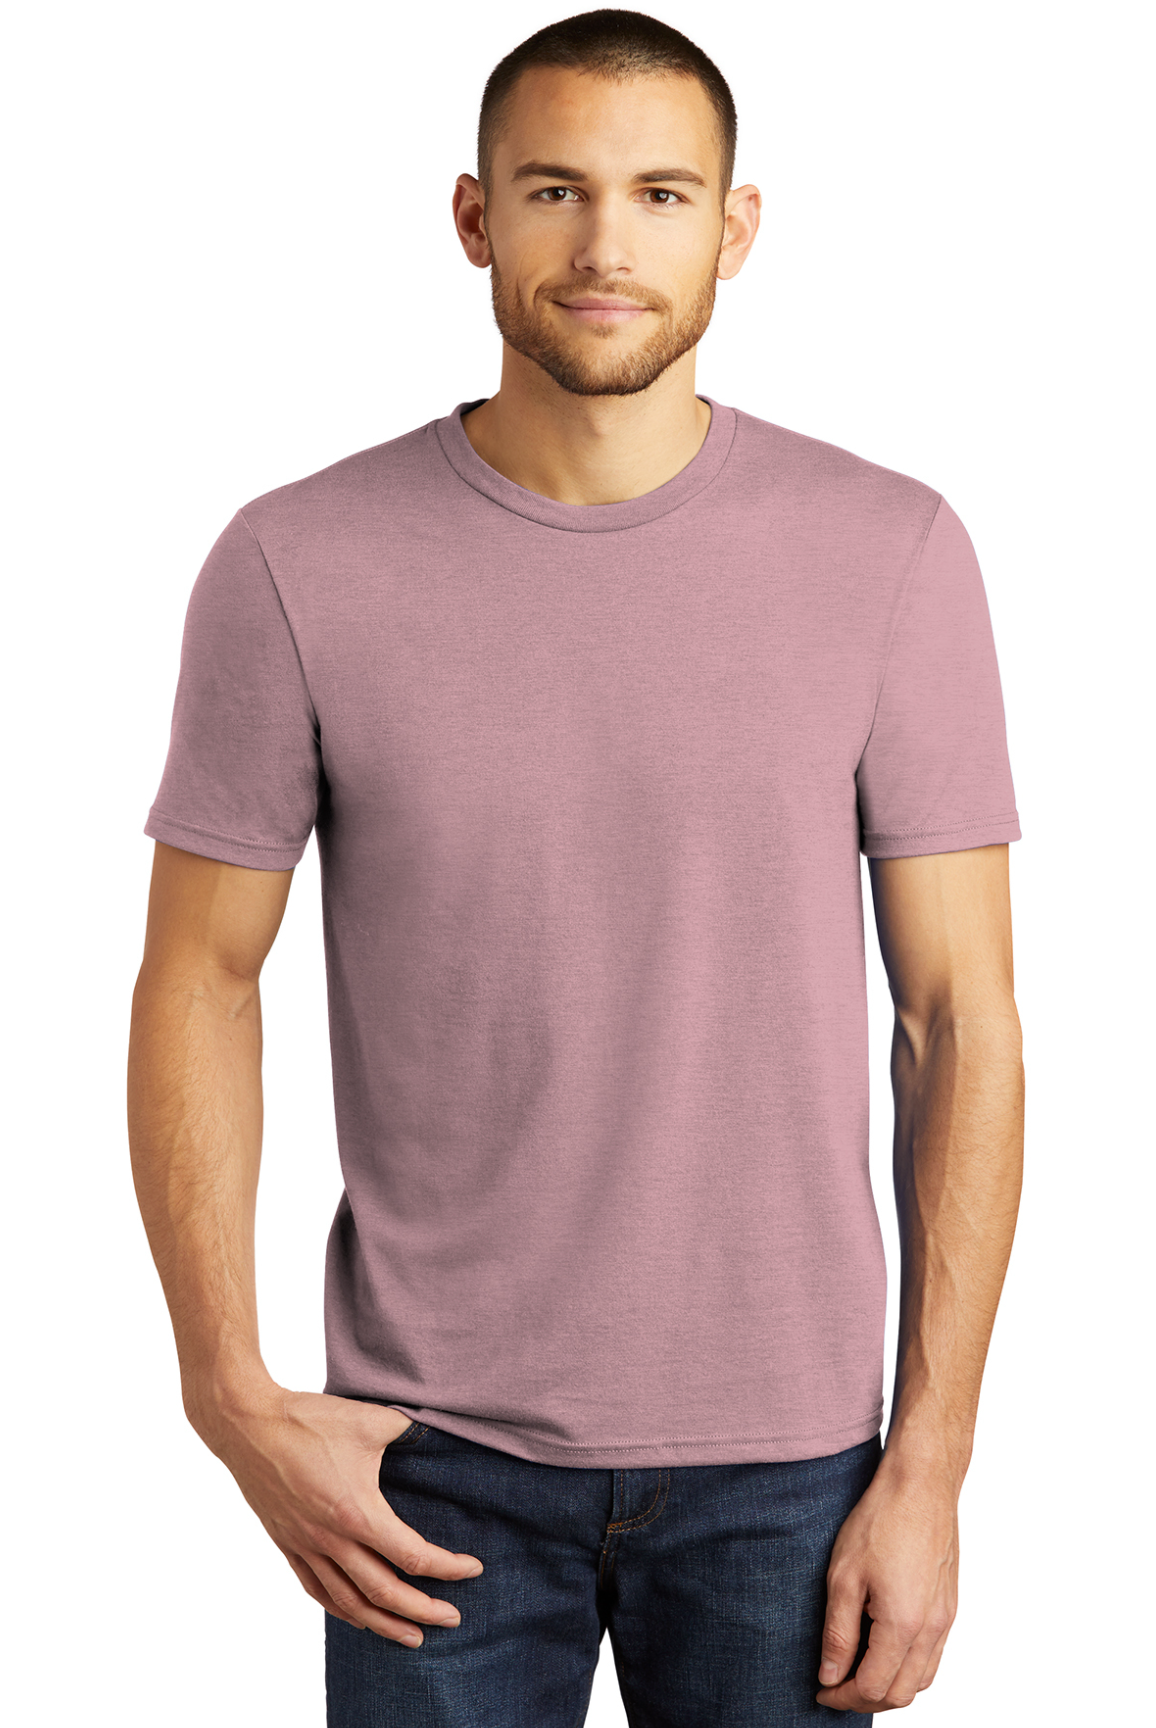 Shirt - Love AT-AT First Sight - Heathered Lavender - Unisex Crew